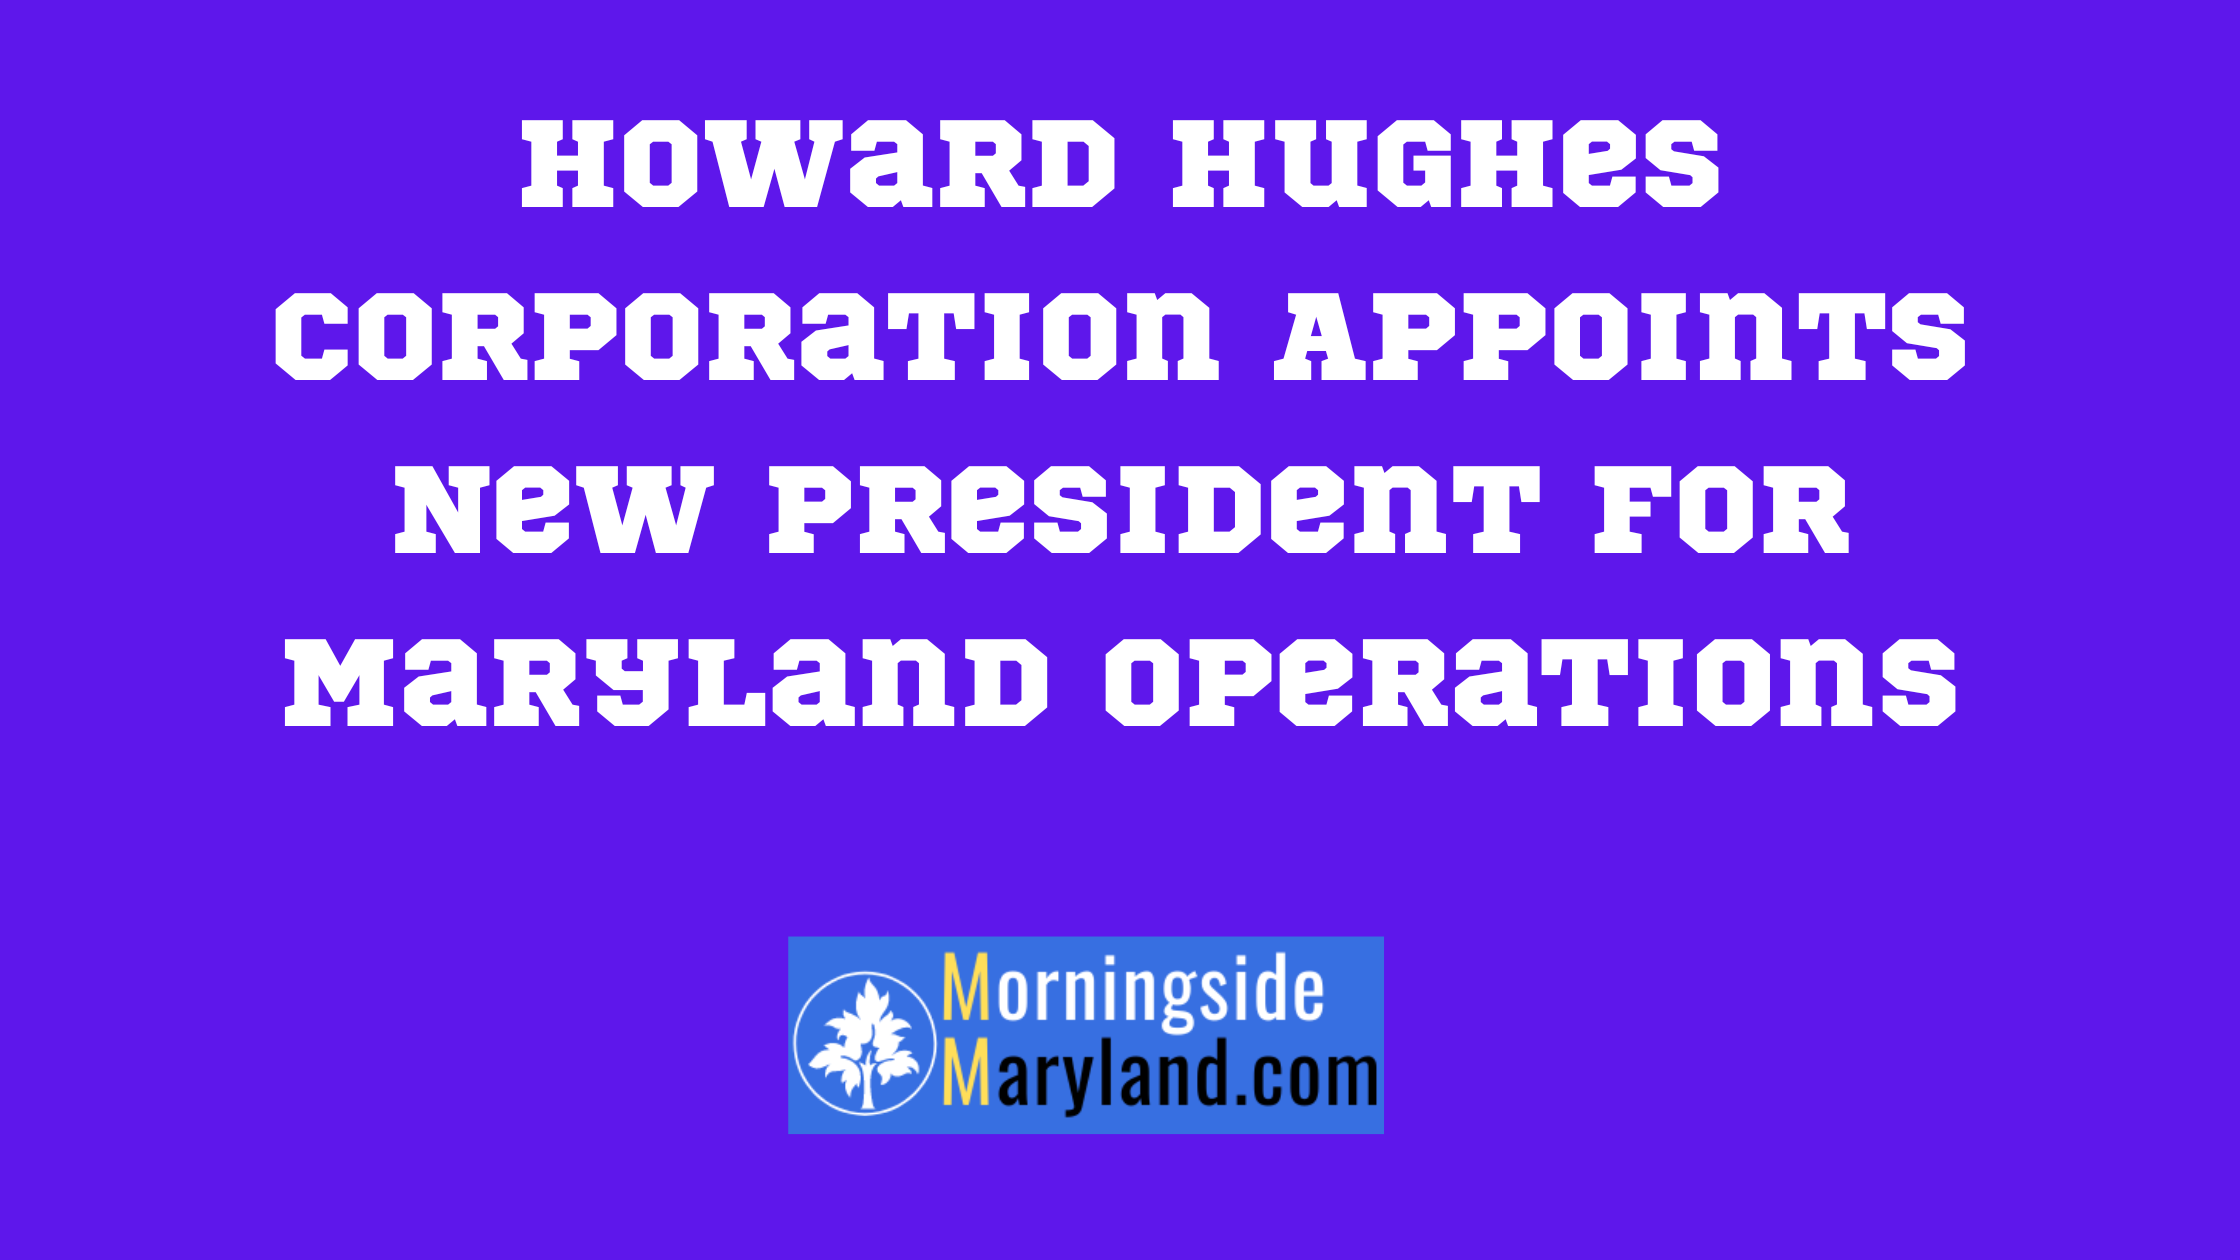 Howard Hughes Corporation Appoints New President for Maryland Operations